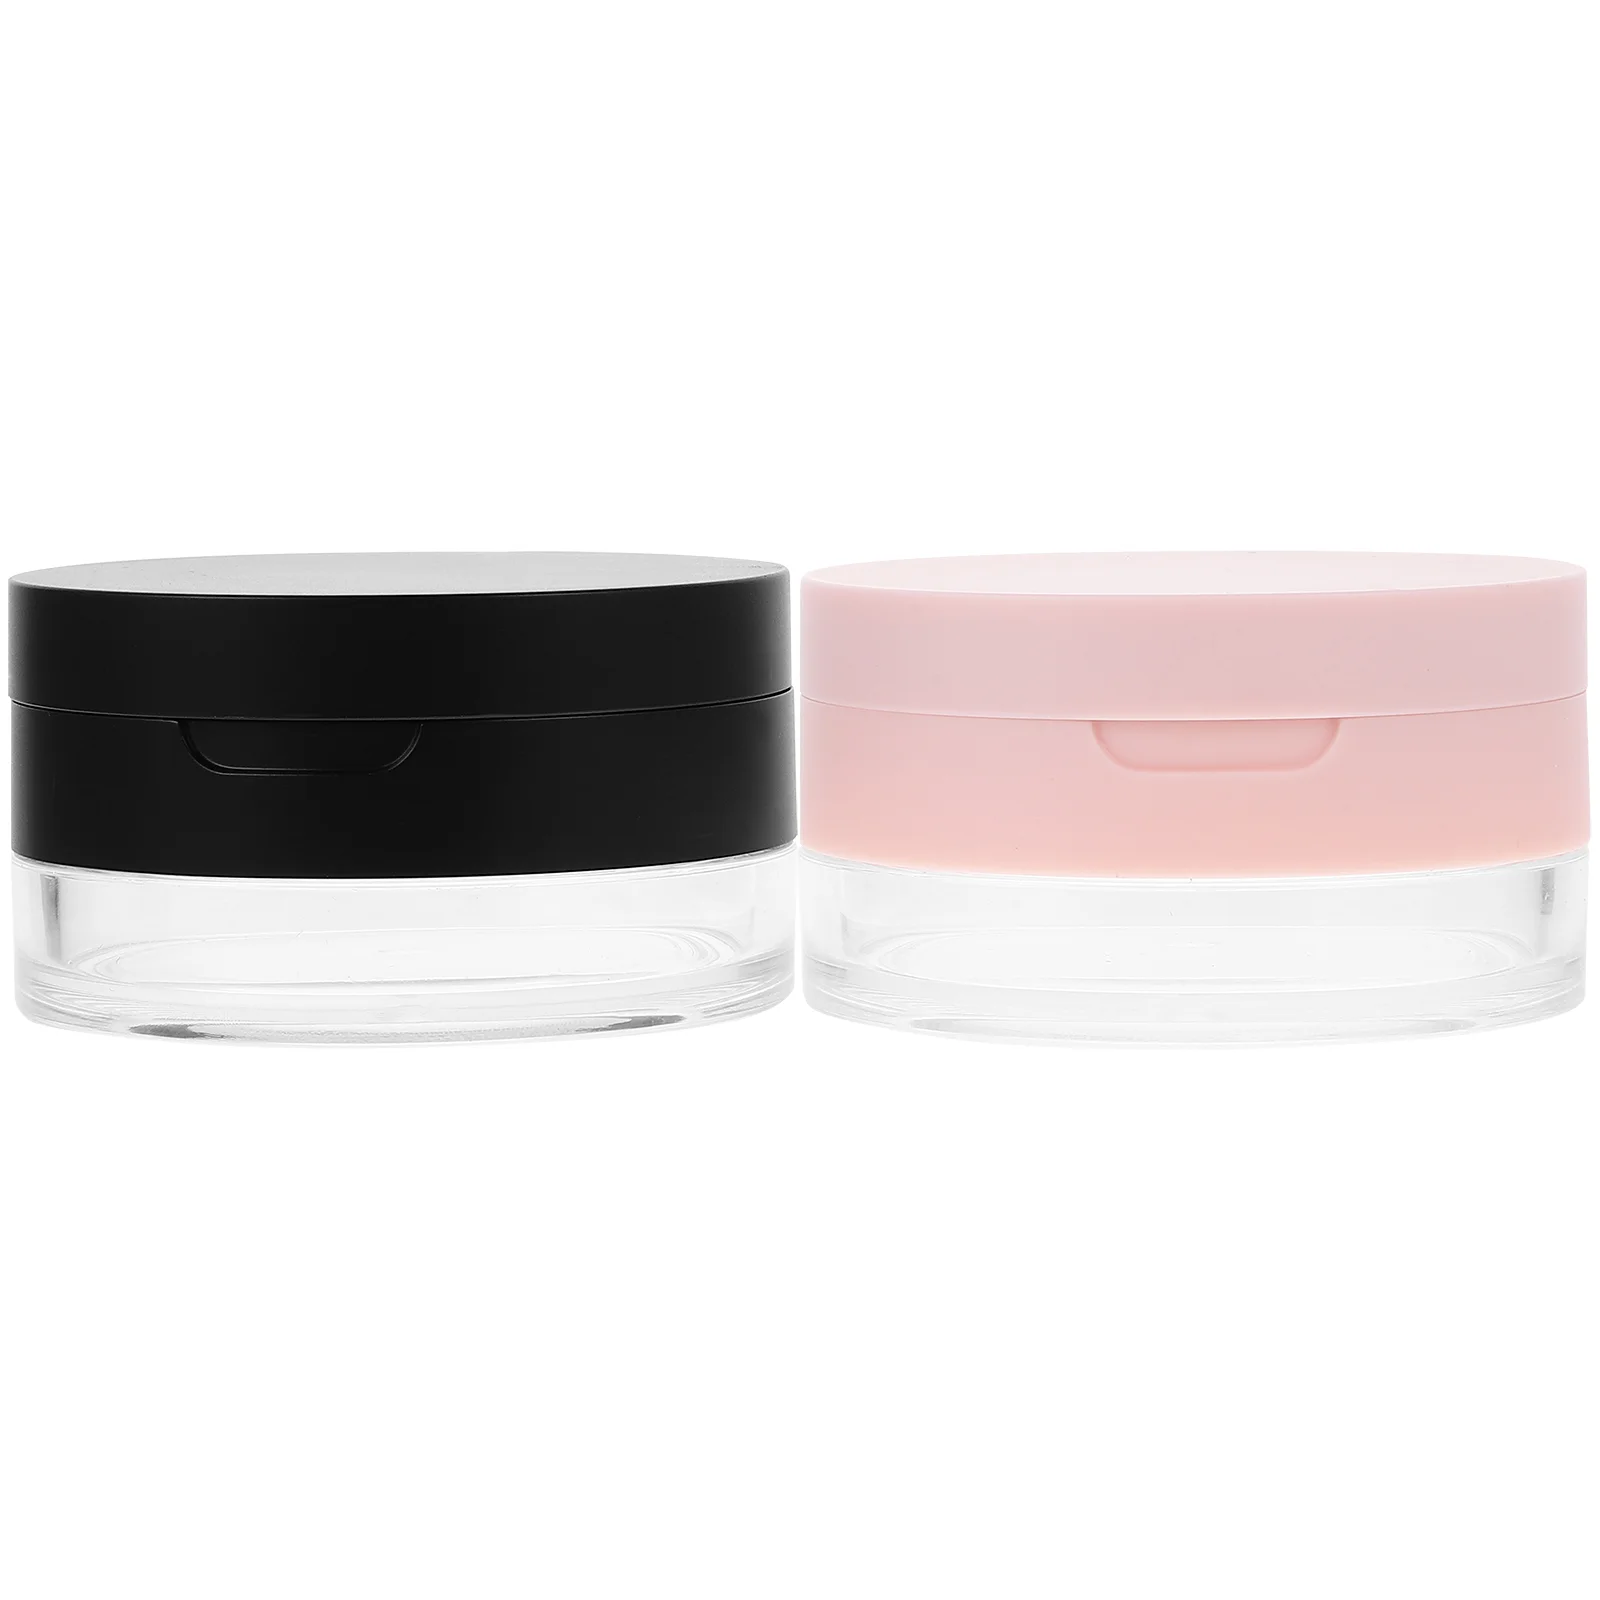 

2pcs Loose Powder Containers Portable Powder Containers Makeup Powder Boxes with Puffs